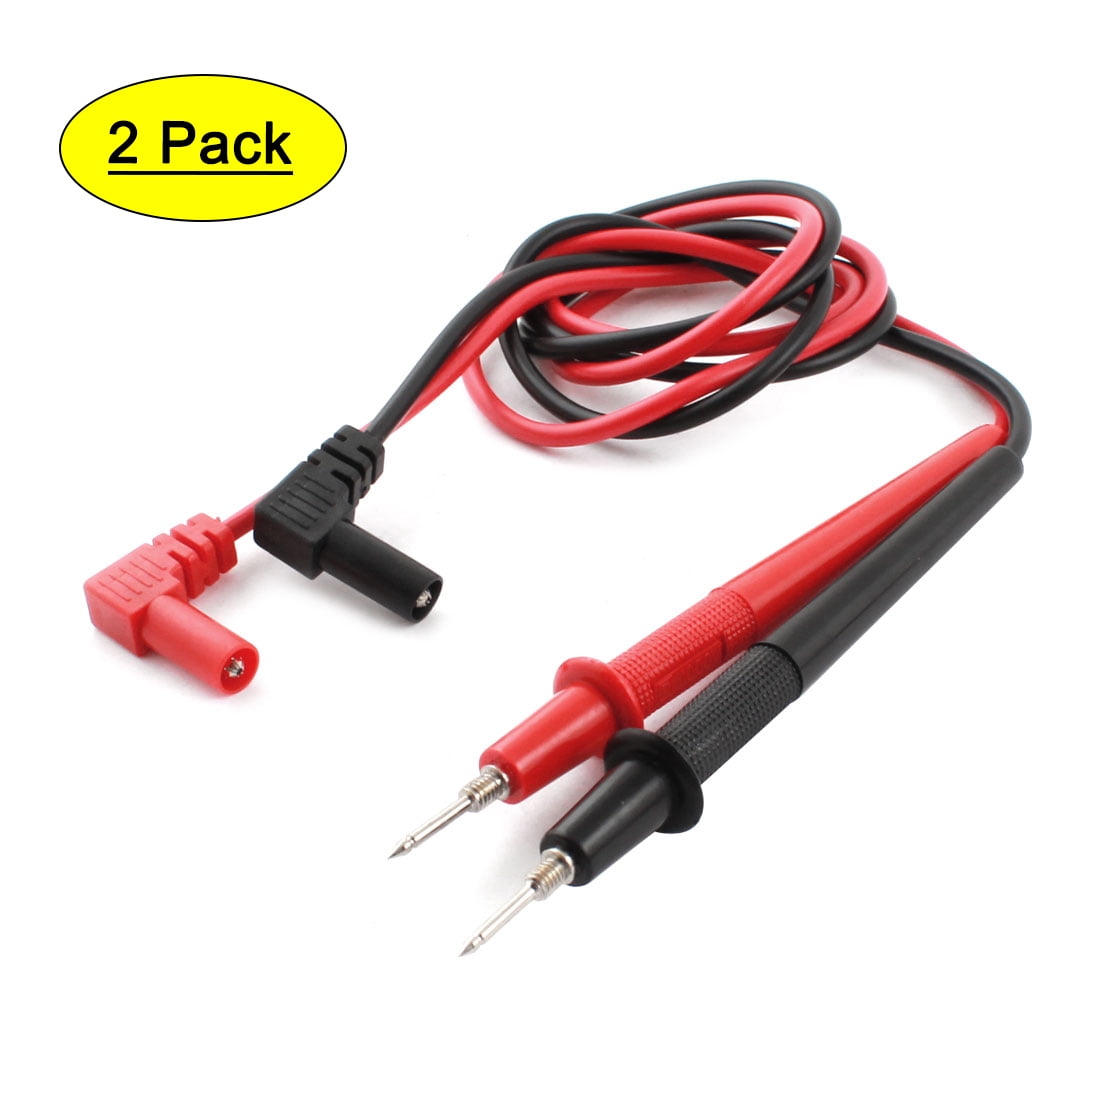 10x Universal Replacement Pair Test Lead Cable Probe Digital Multimeters Testing 